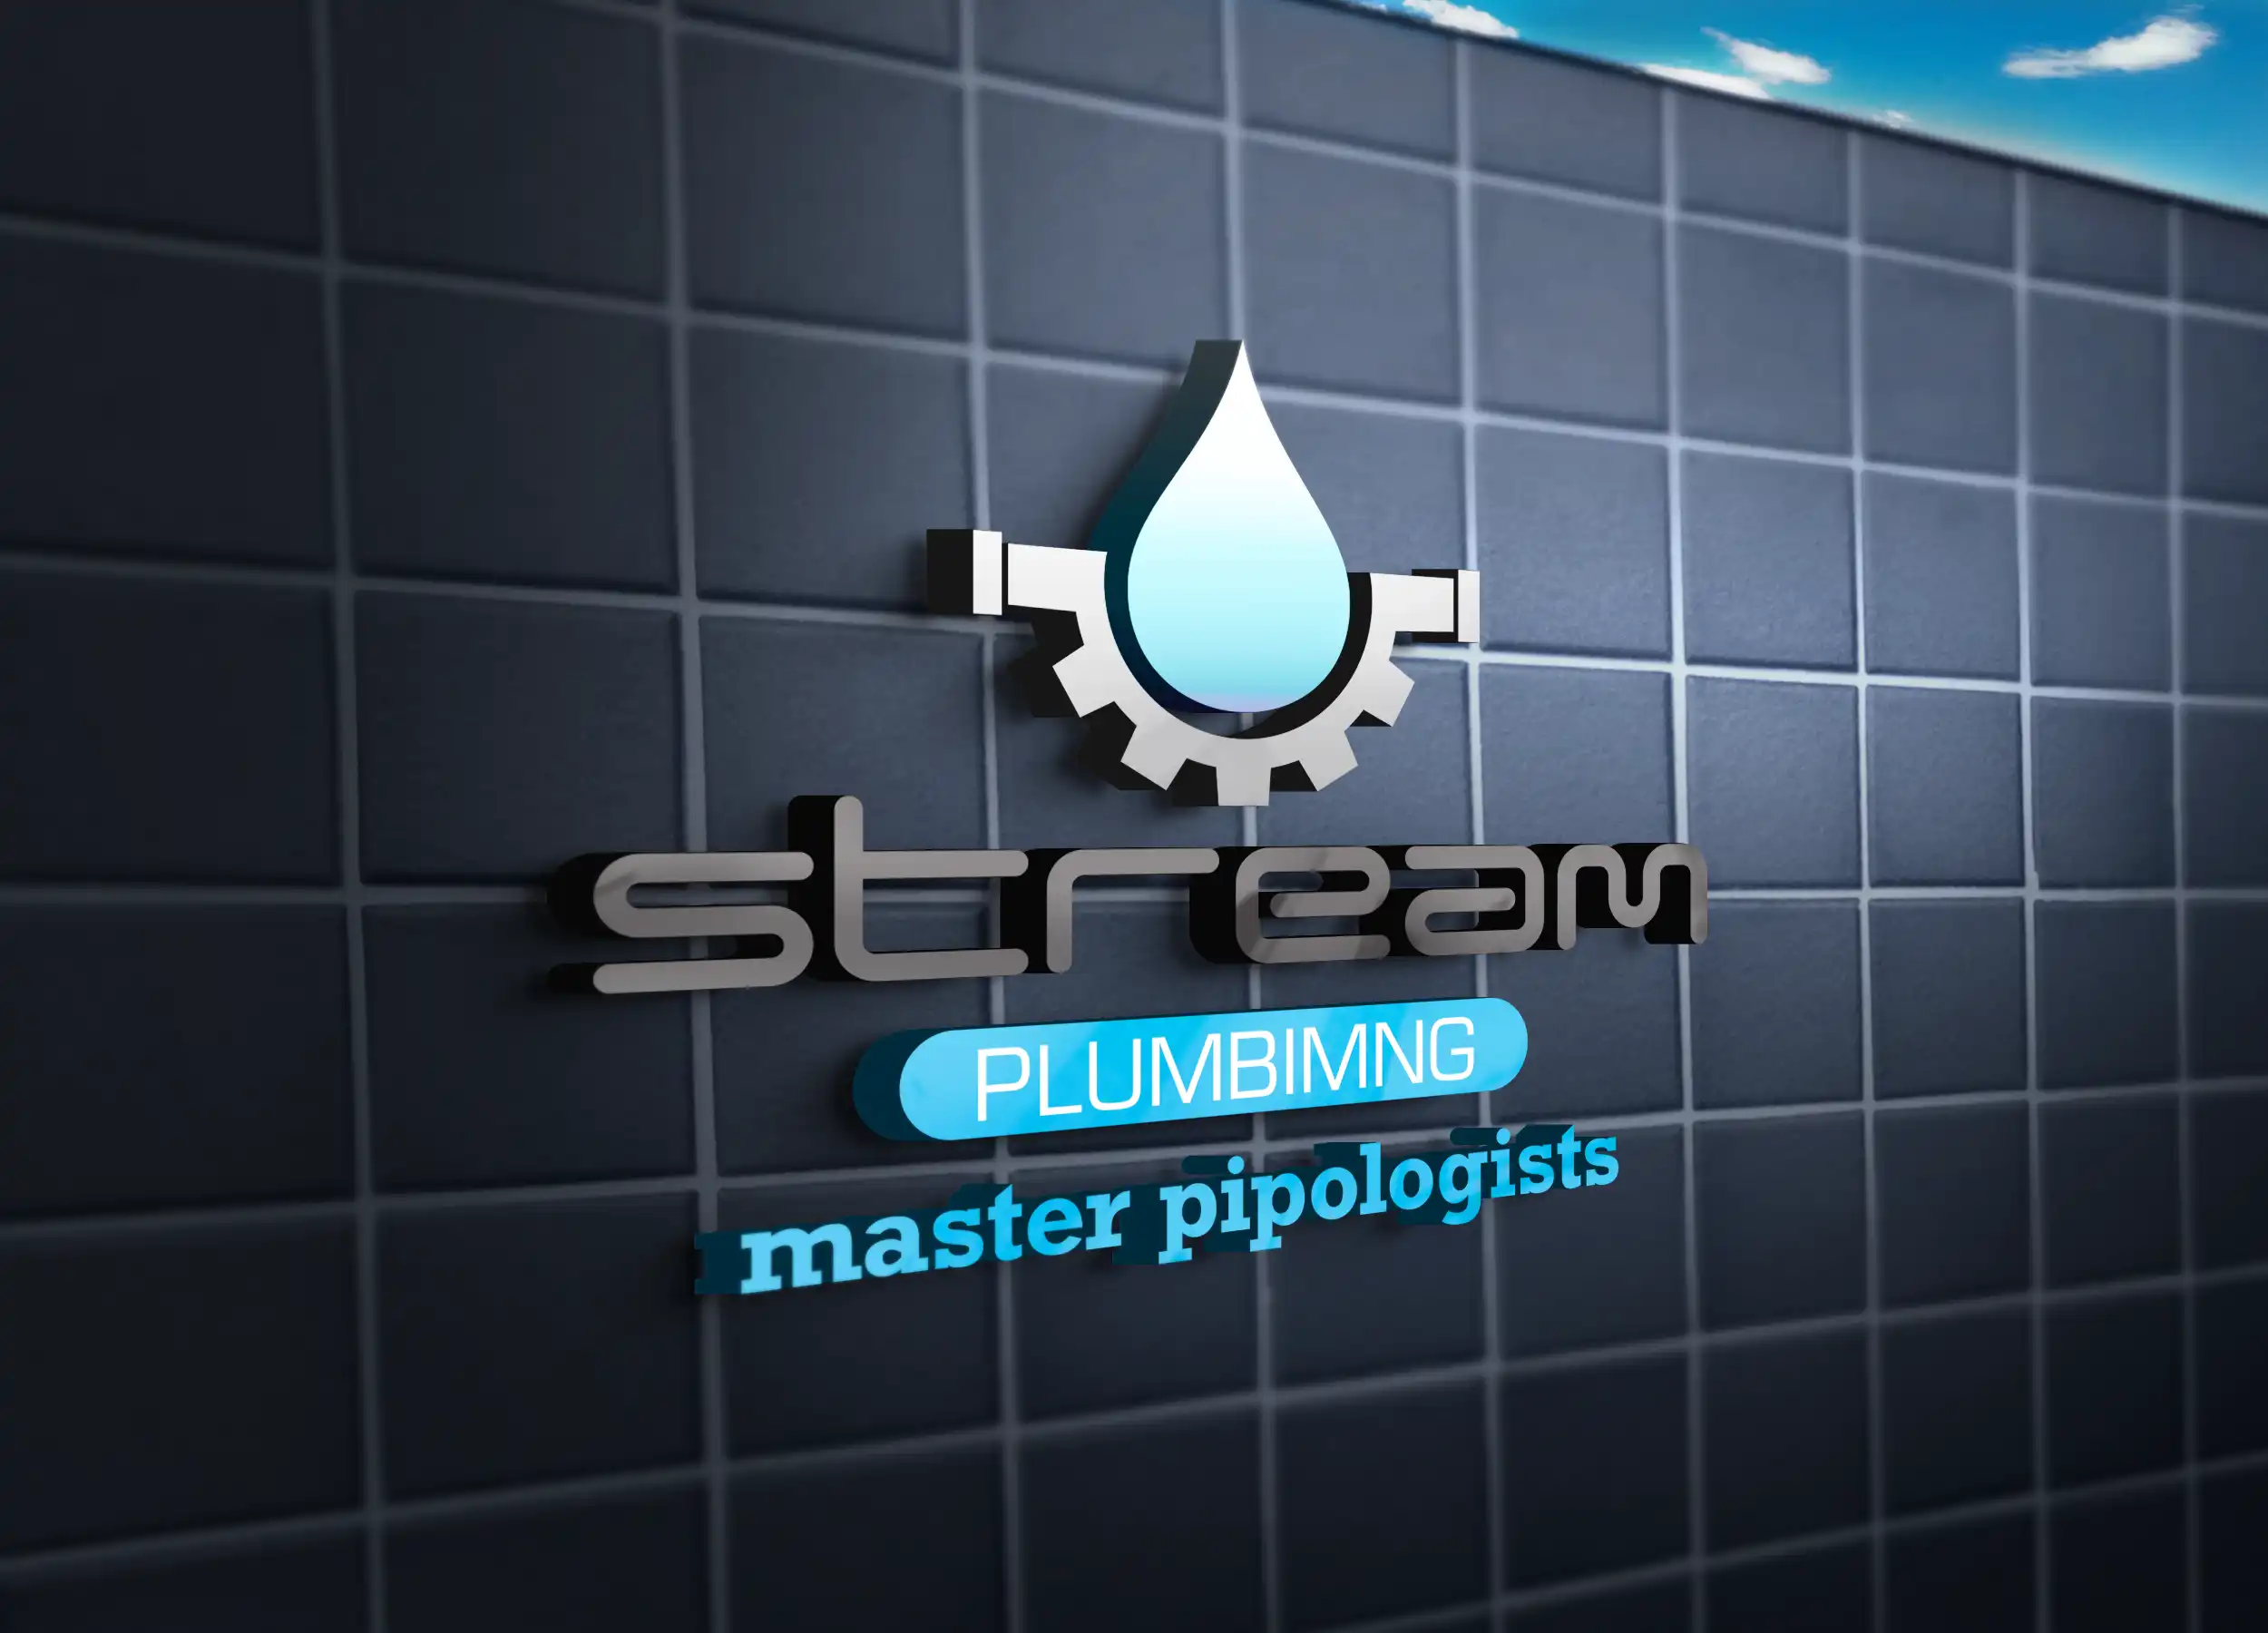 Logo Making made easy for Stream Plumbing in Spreydon, Christchurch. Logo Design made by XDC.NZ, the super experienced Logo Designer or Logo Maker based in Christchurch & Rolleston Selwyn NZ. Call Clint now on 021 11 44 014